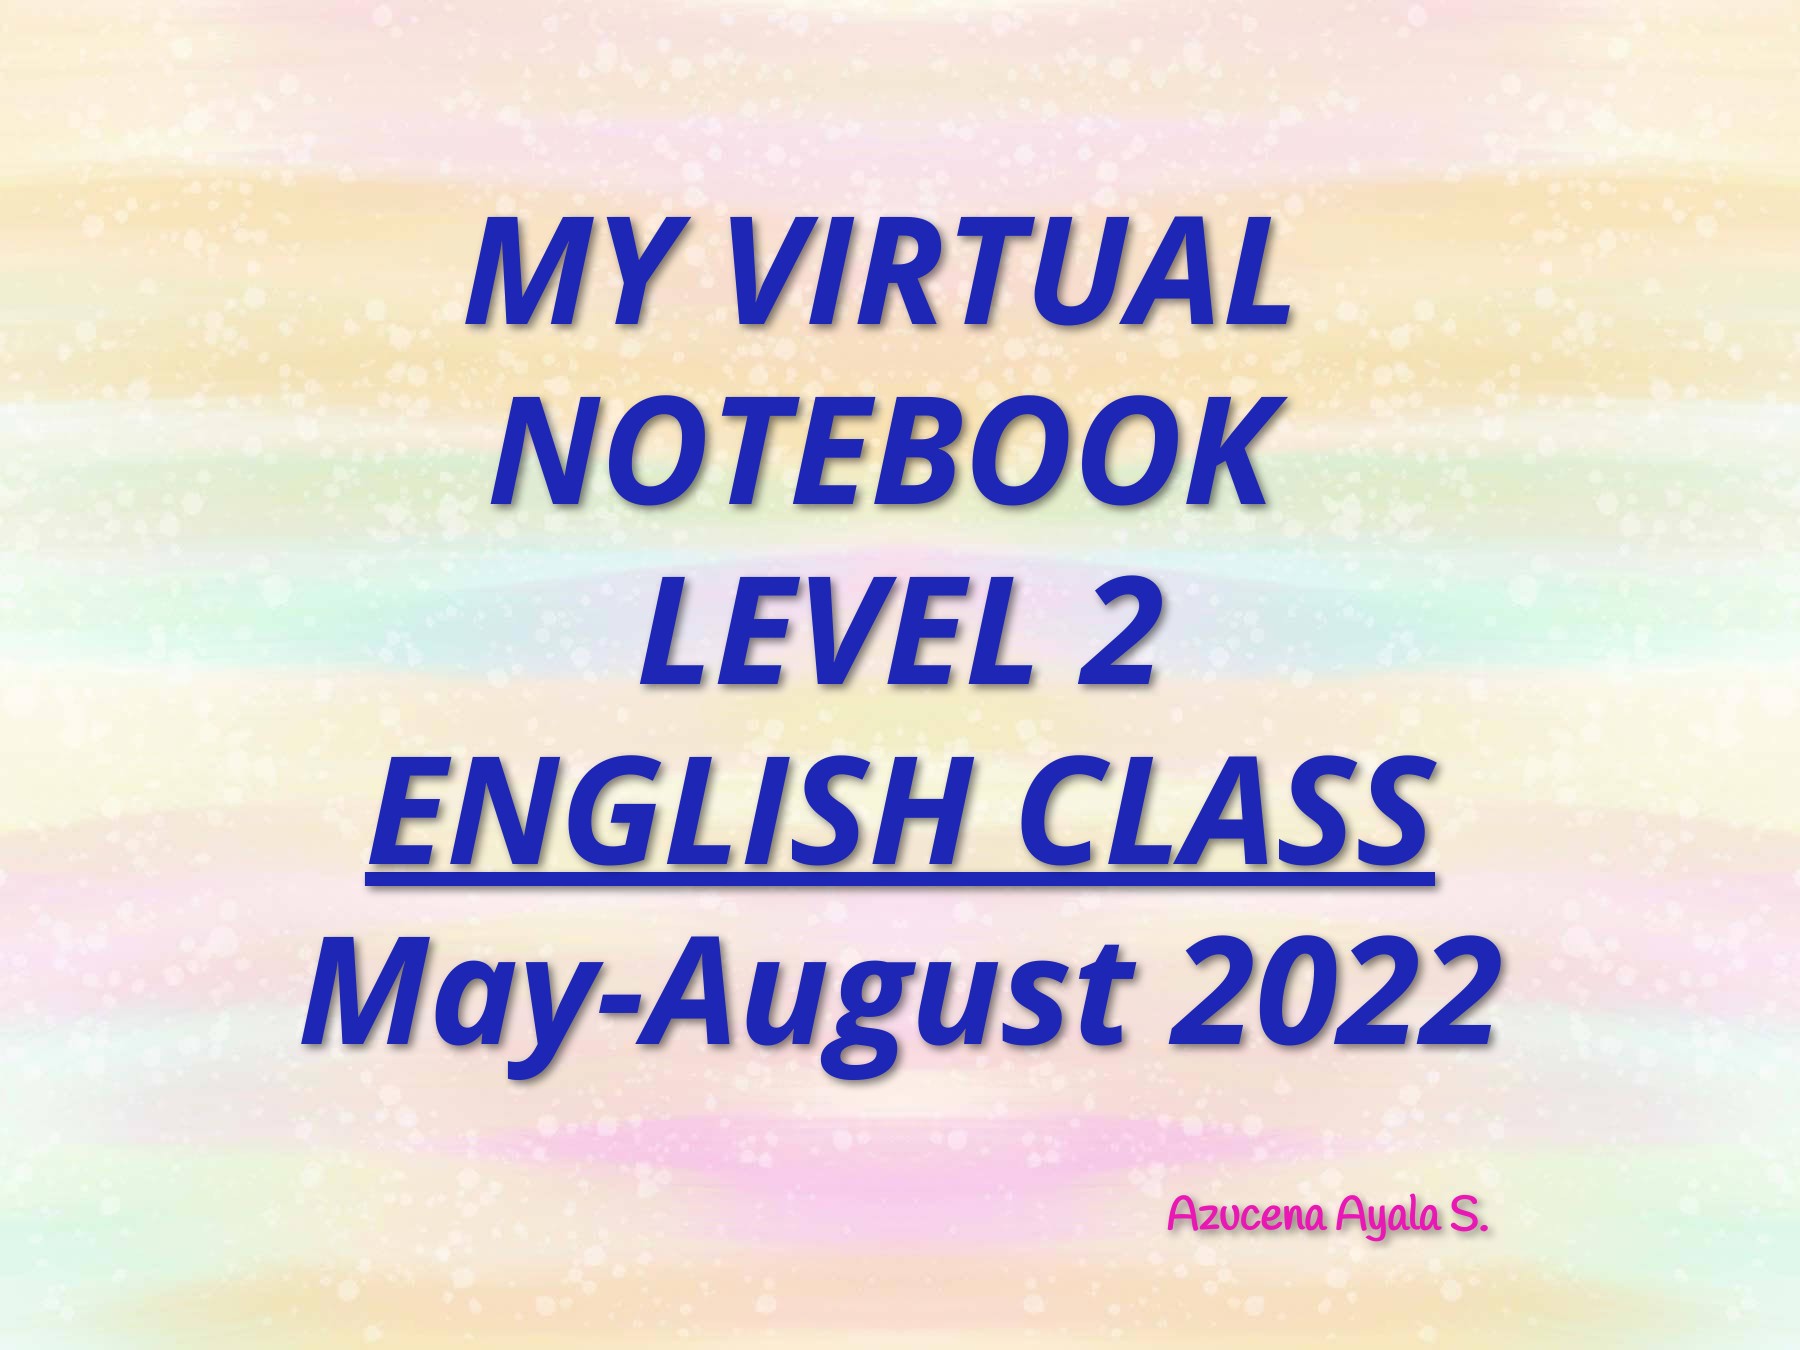 Book Creator - MY VIRTUAL NOTEBOOK LEVEL 2 ENGLISH CLASS May-August 2022